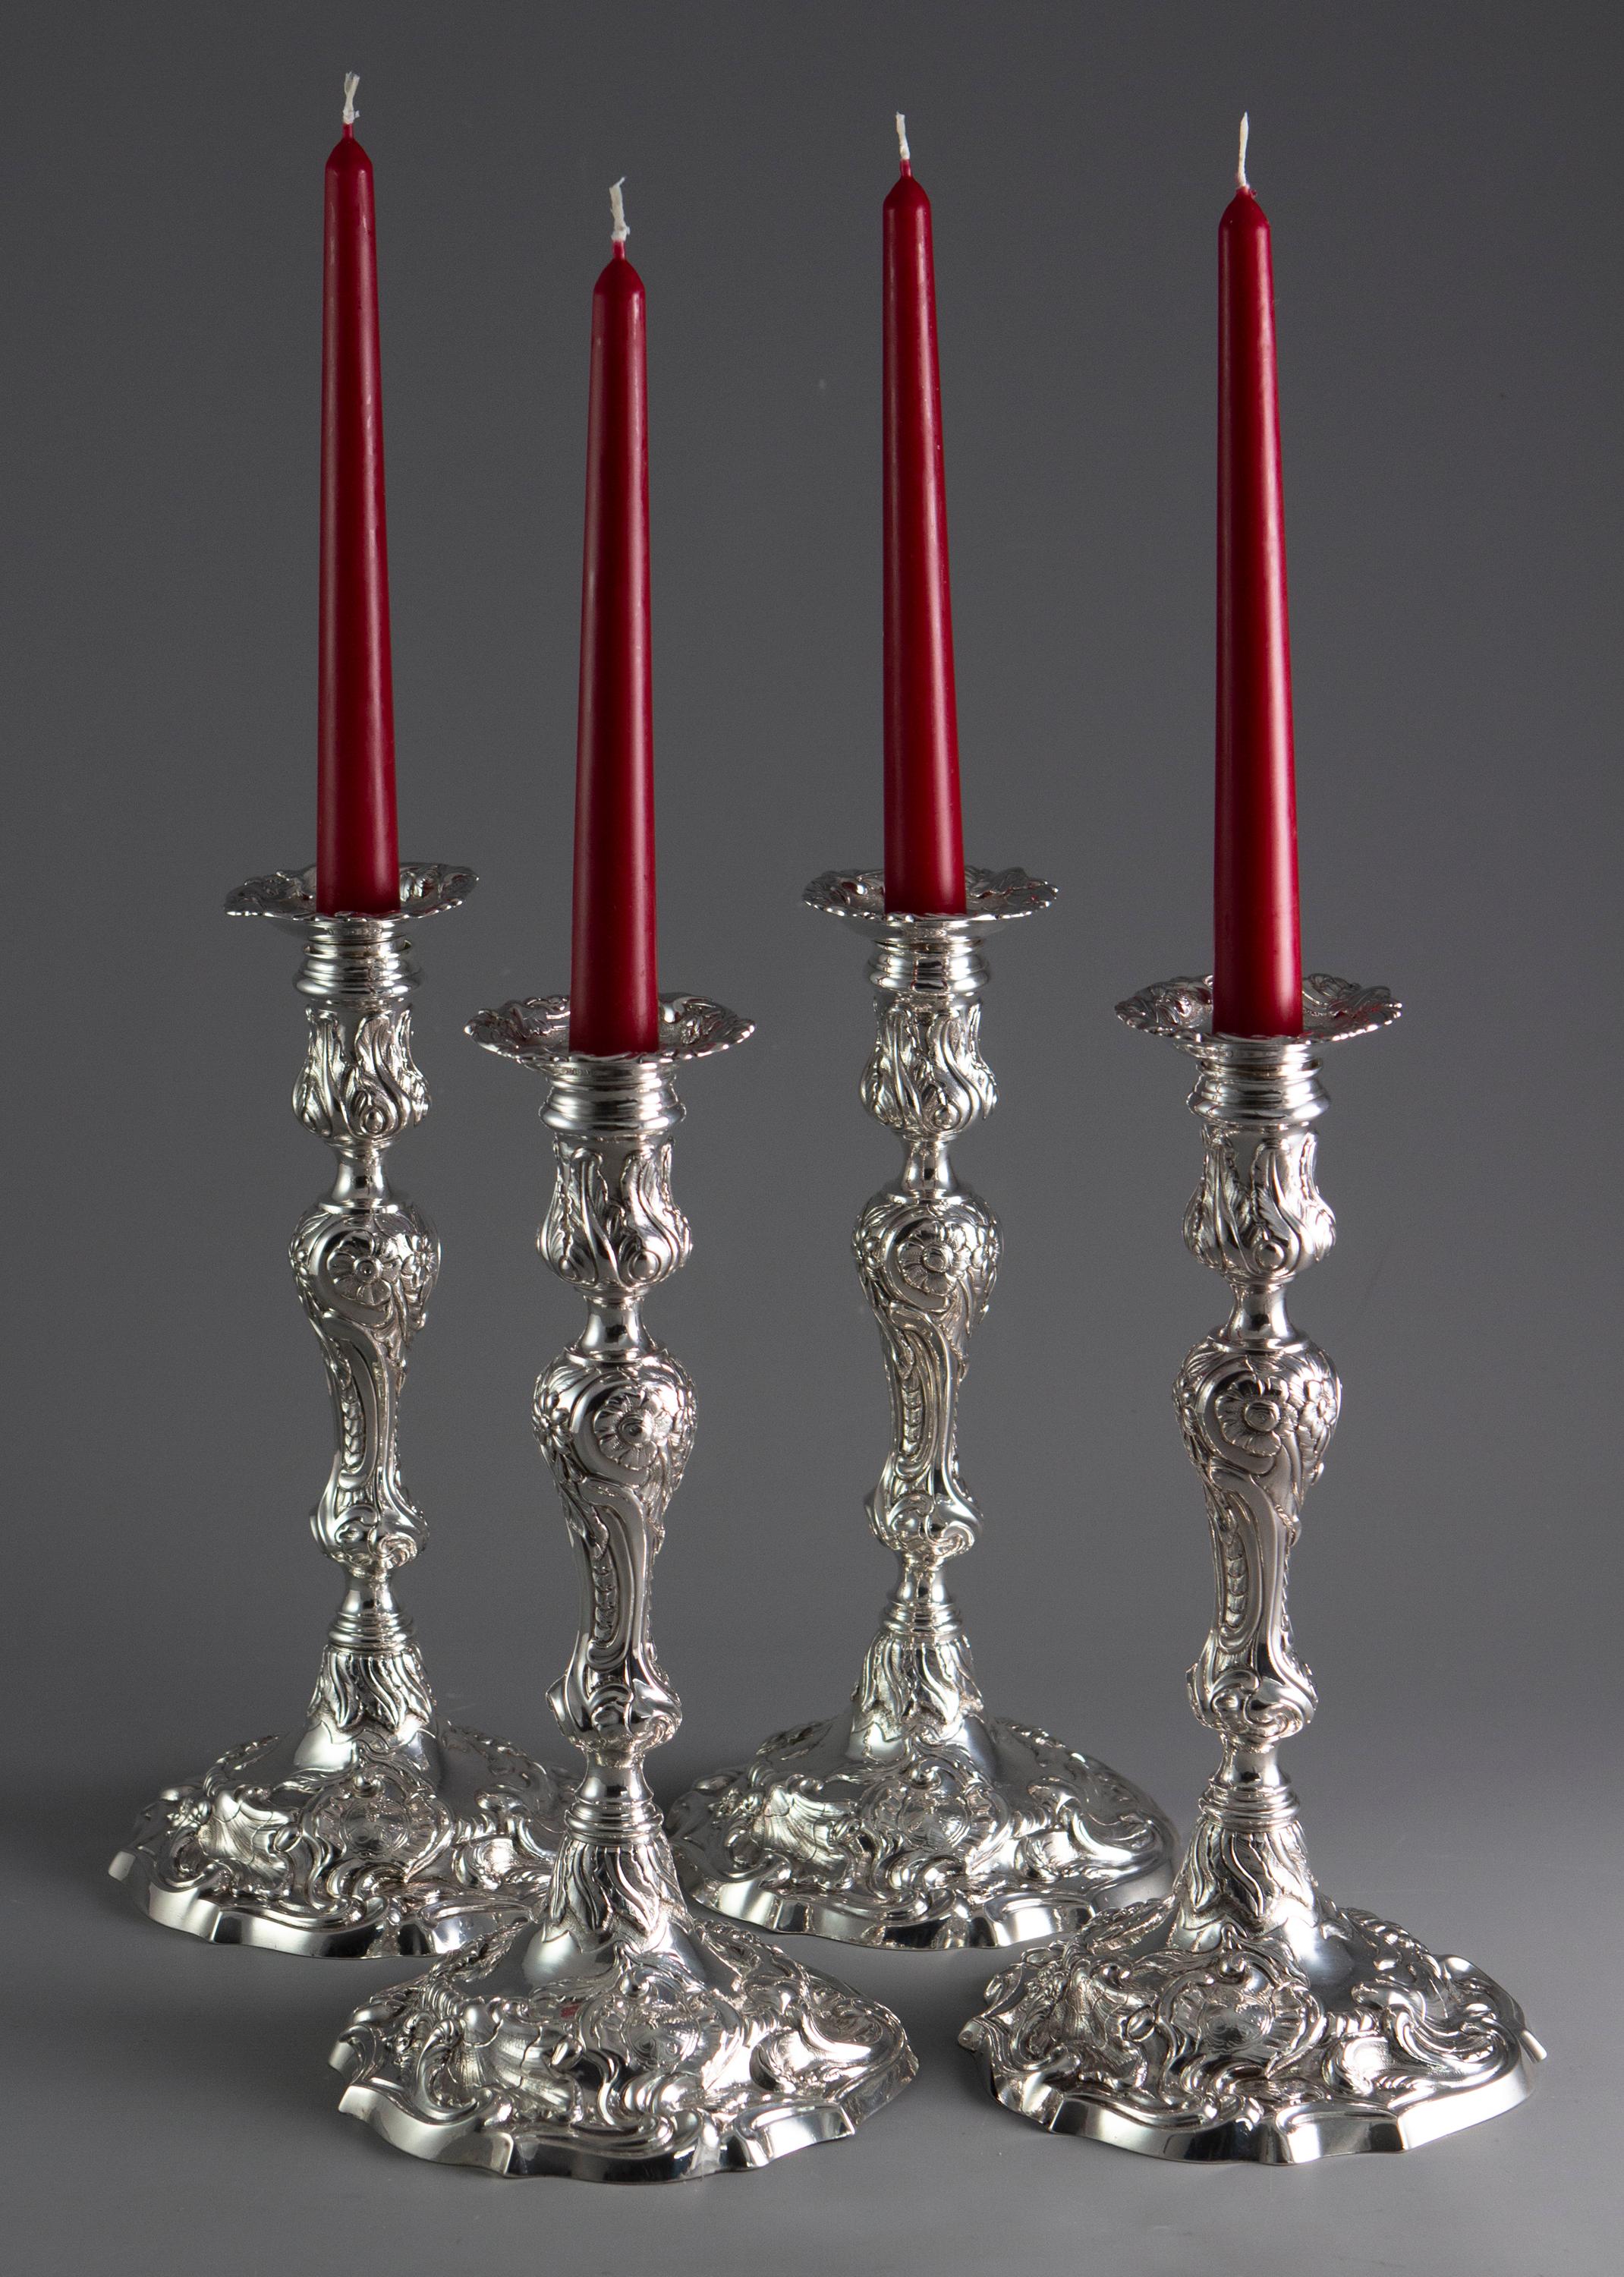 An extremely fine set of cast silver George II table candlesticks in the naturalistic style. Standing on a cast, shaped base, the fluted and knopped column is surmounted with to a shaped capital. All decorated in the asymmetrical naturalistic style